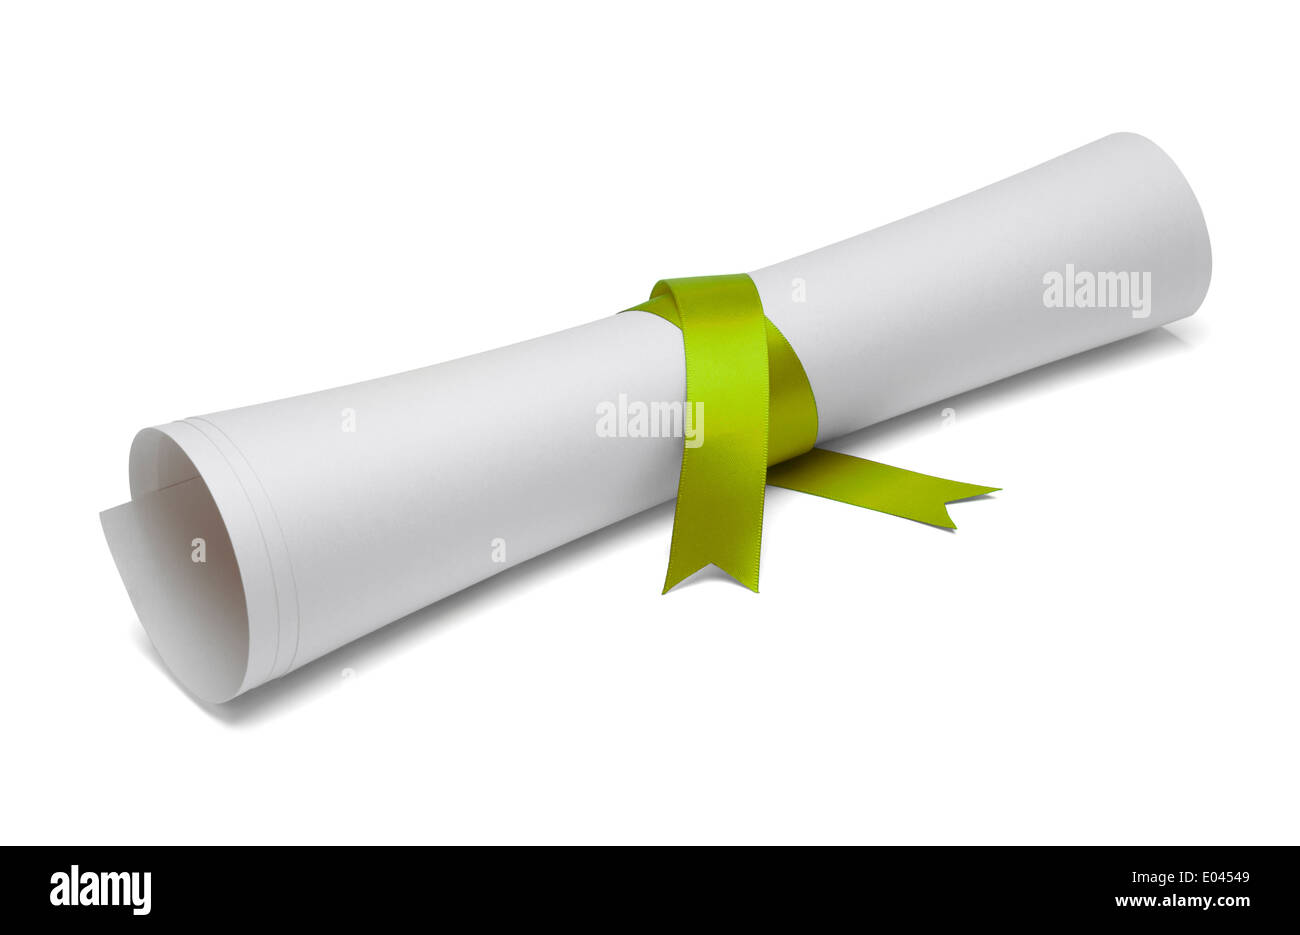 Diploma tied with green ribbon on a white isolated background. Stock Photo